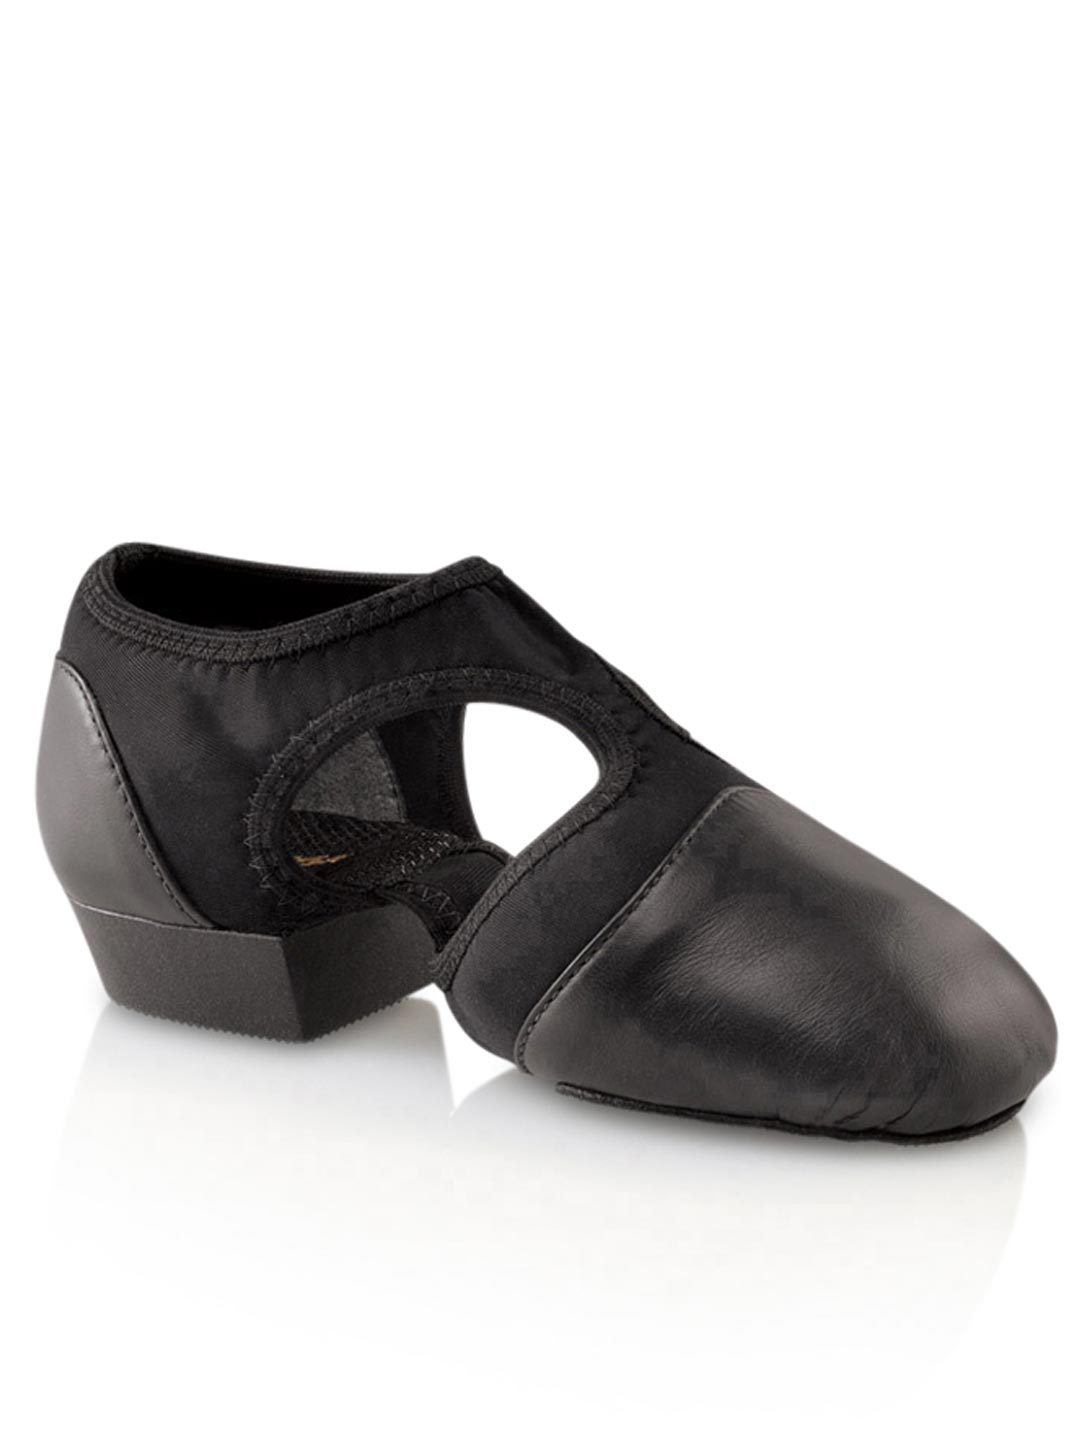 dance direct jazz shoes